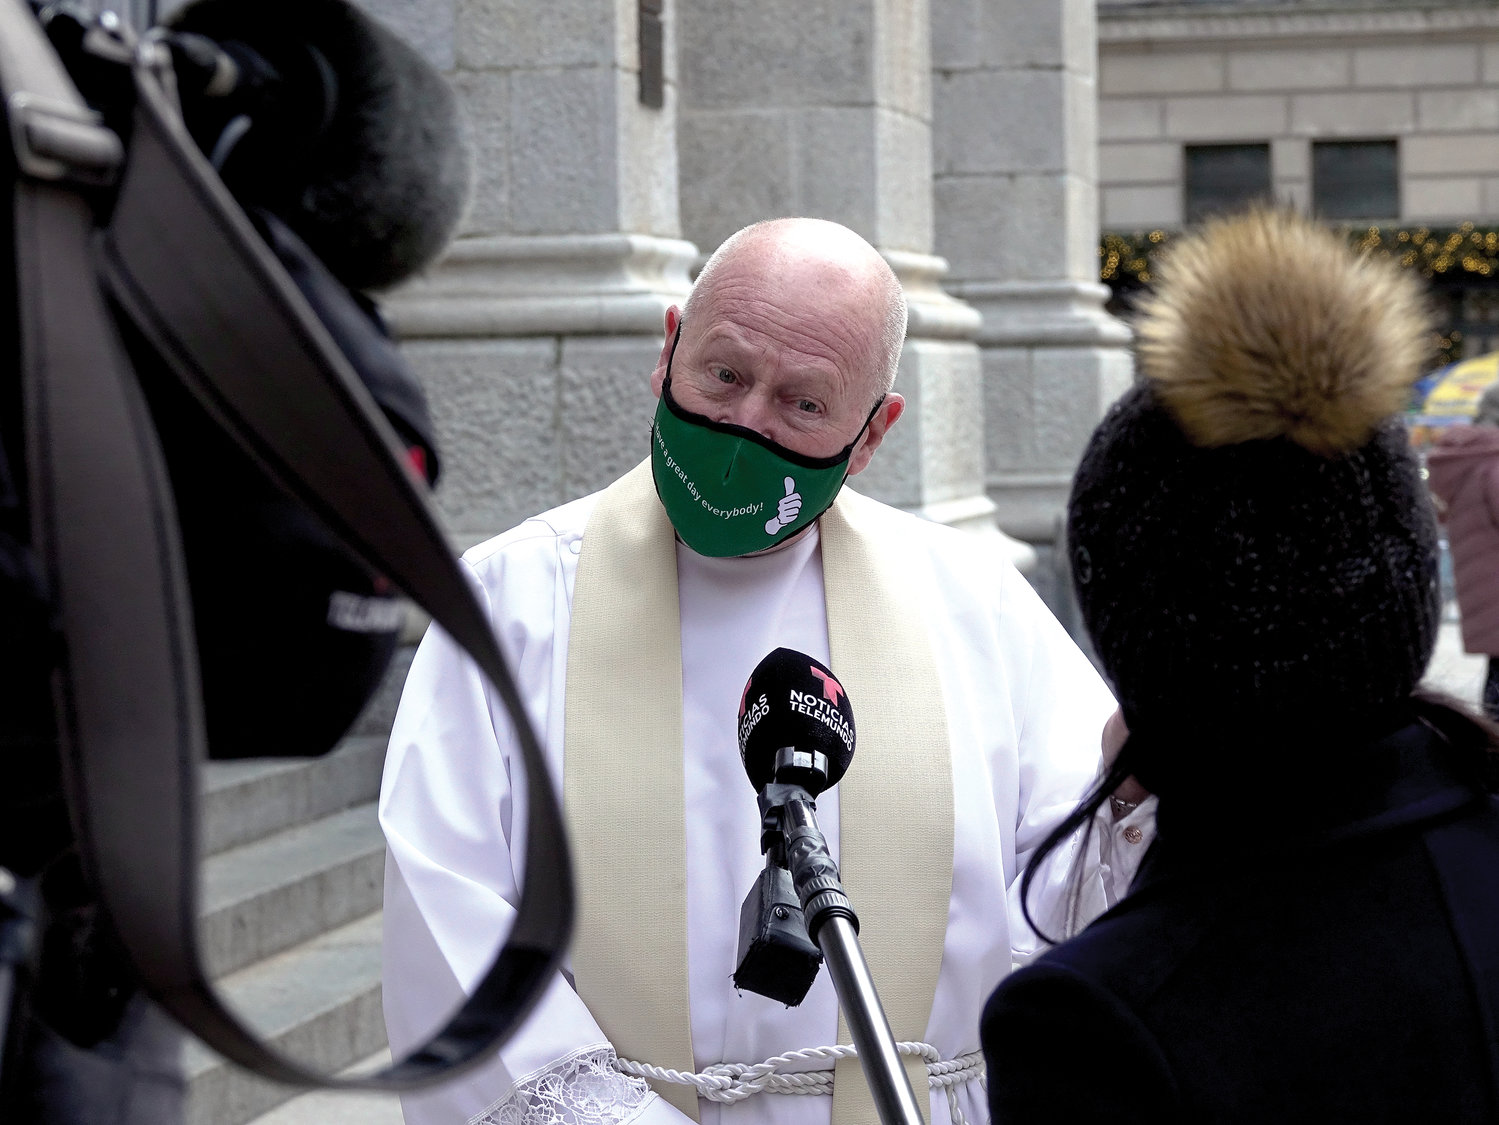 Msgr. Robert Ritchie, rector of St. Patrick’s Cathedral, is interviewed on the cathedral steps.